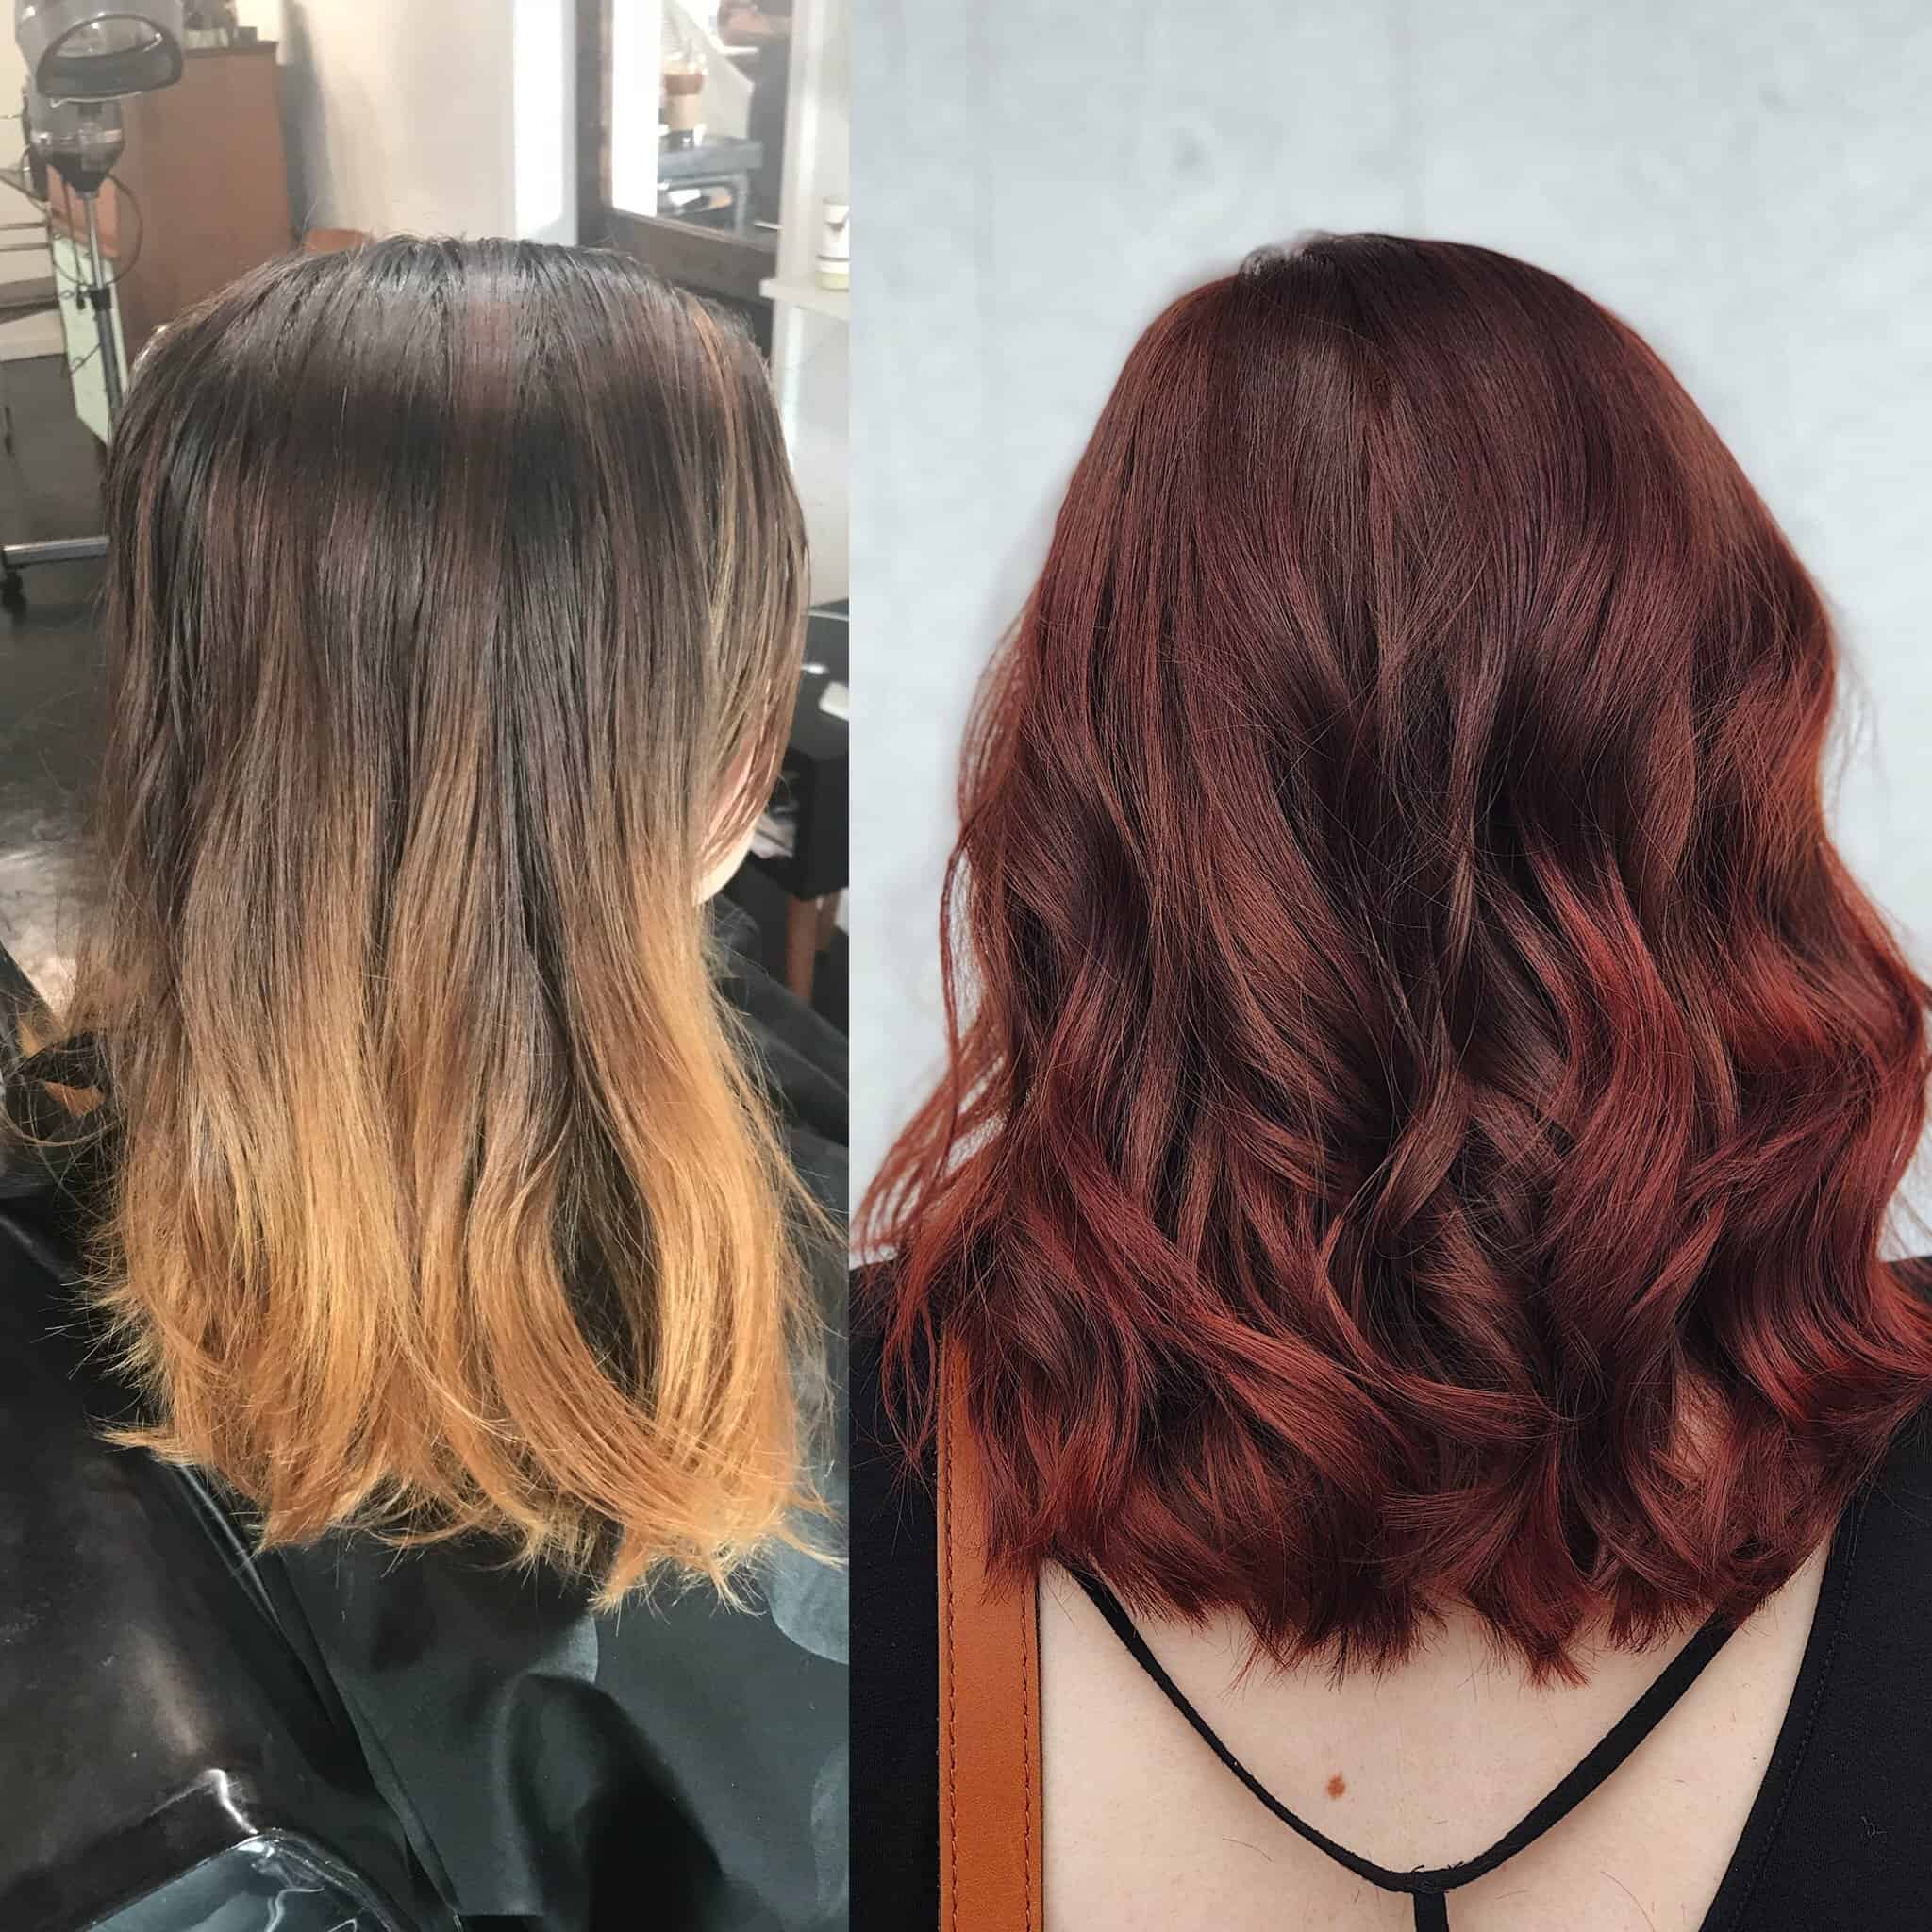 Faded Brown & Copper Balayage to Deep, Ruby Red For Fall - The Mailroom  Barber Co